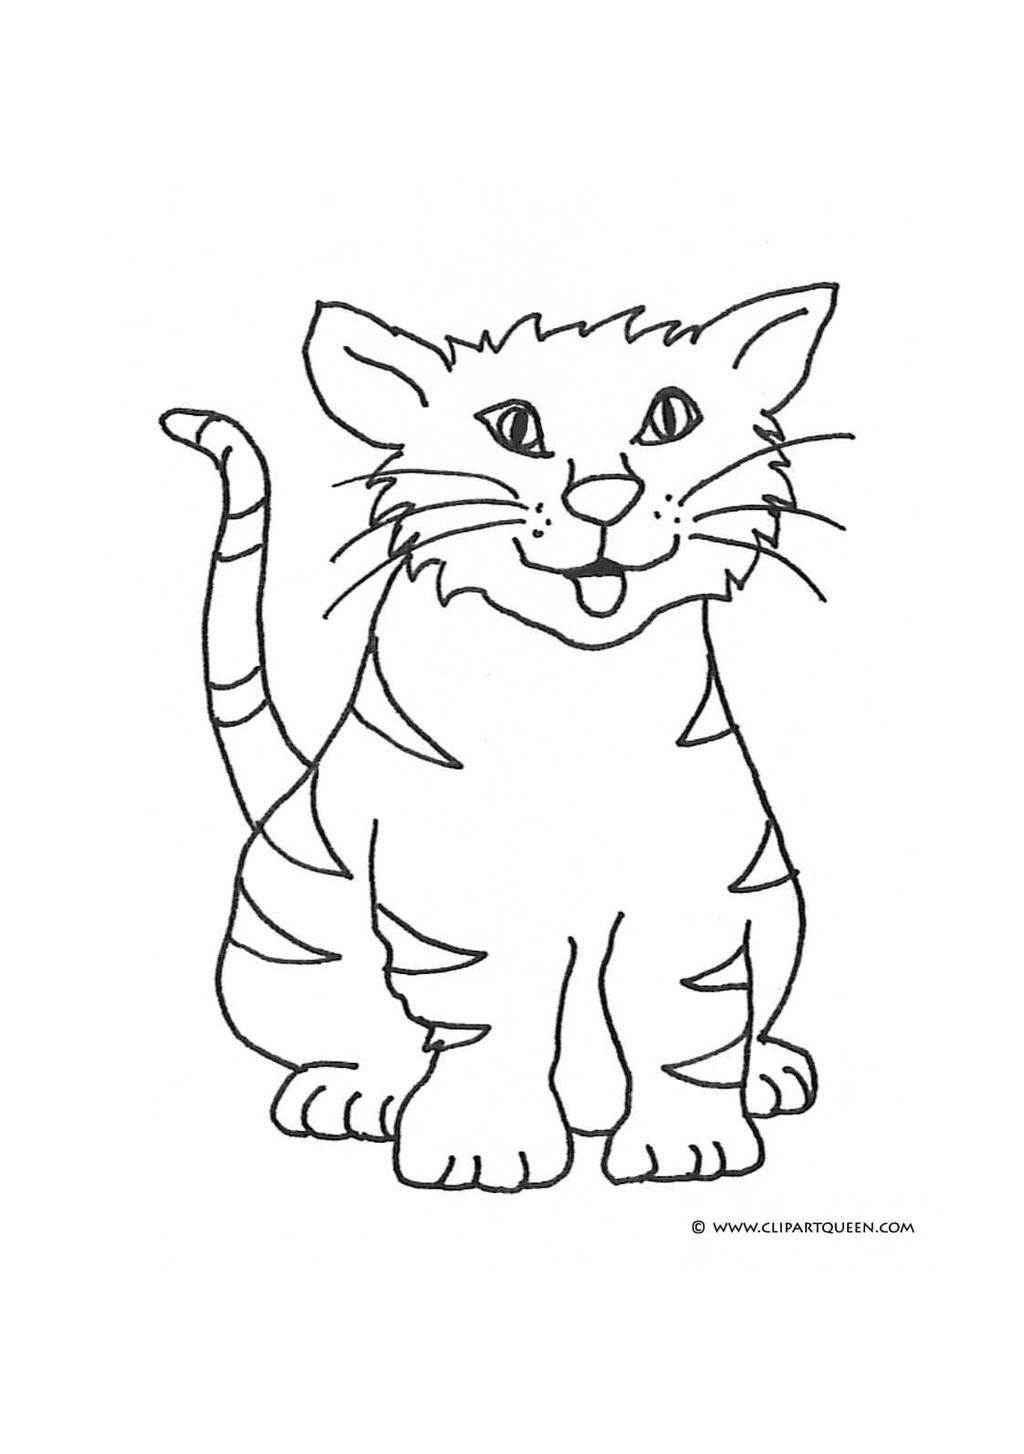 Free Simple Black Cat Coloring Pages printable